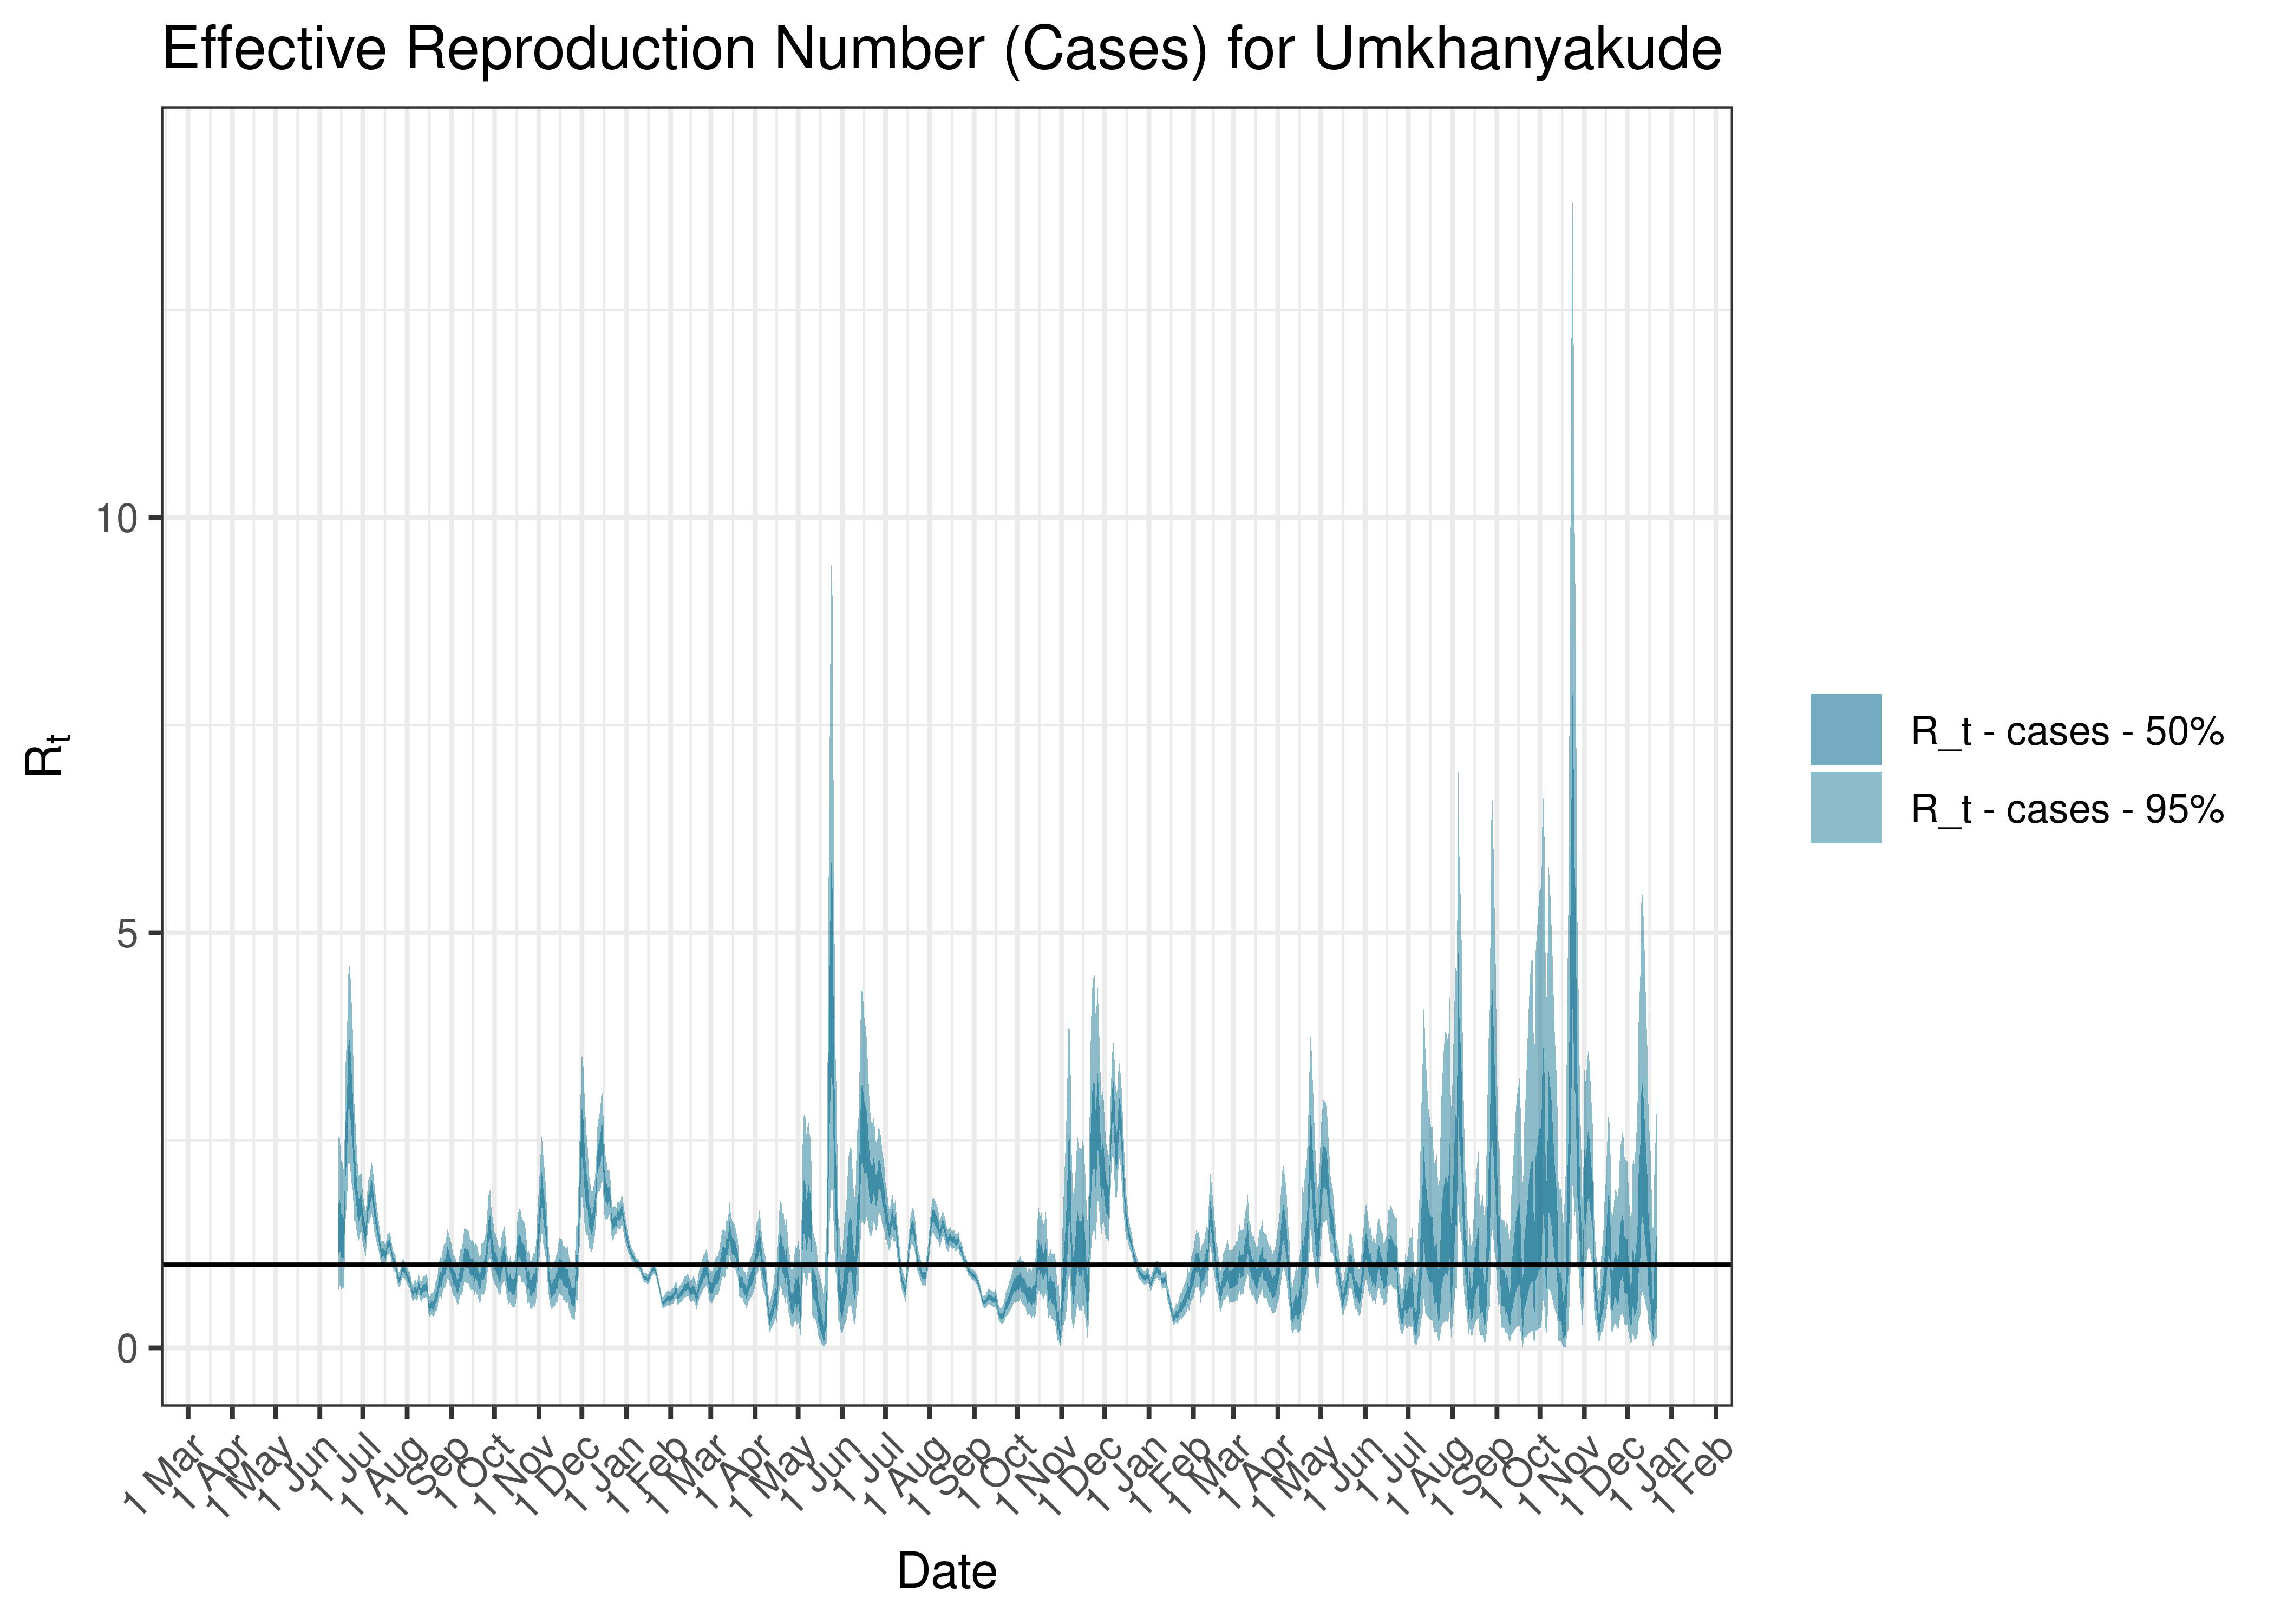 Estimated Effective Reproduction Number Based on Cases for Umkhanyakude since 1 April 2020